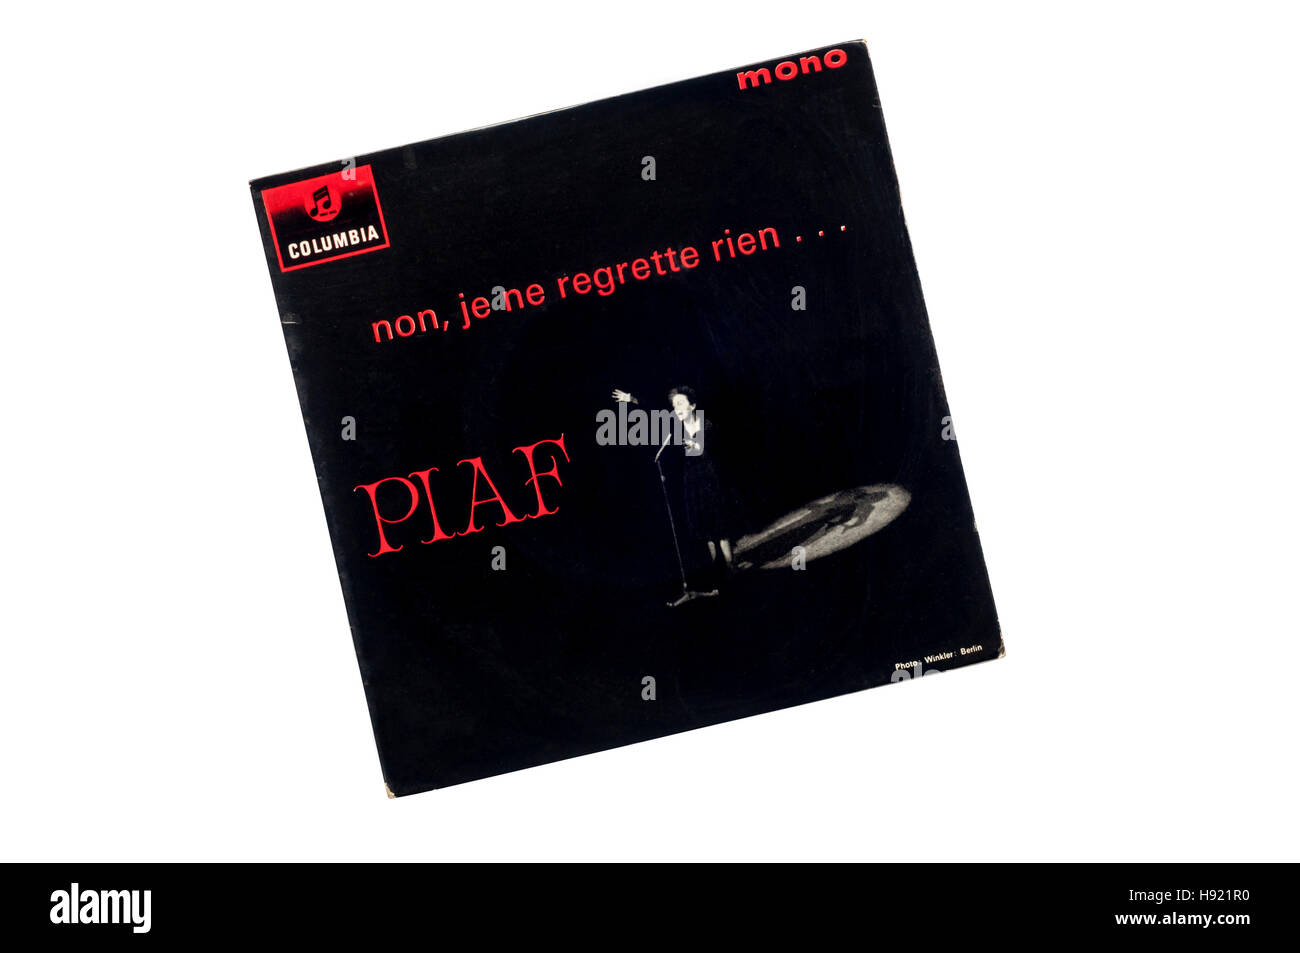 EP of non, je ne regrette rien . . .  by Edith Piaf. Released in 1961 by Columbia. Stock Photo